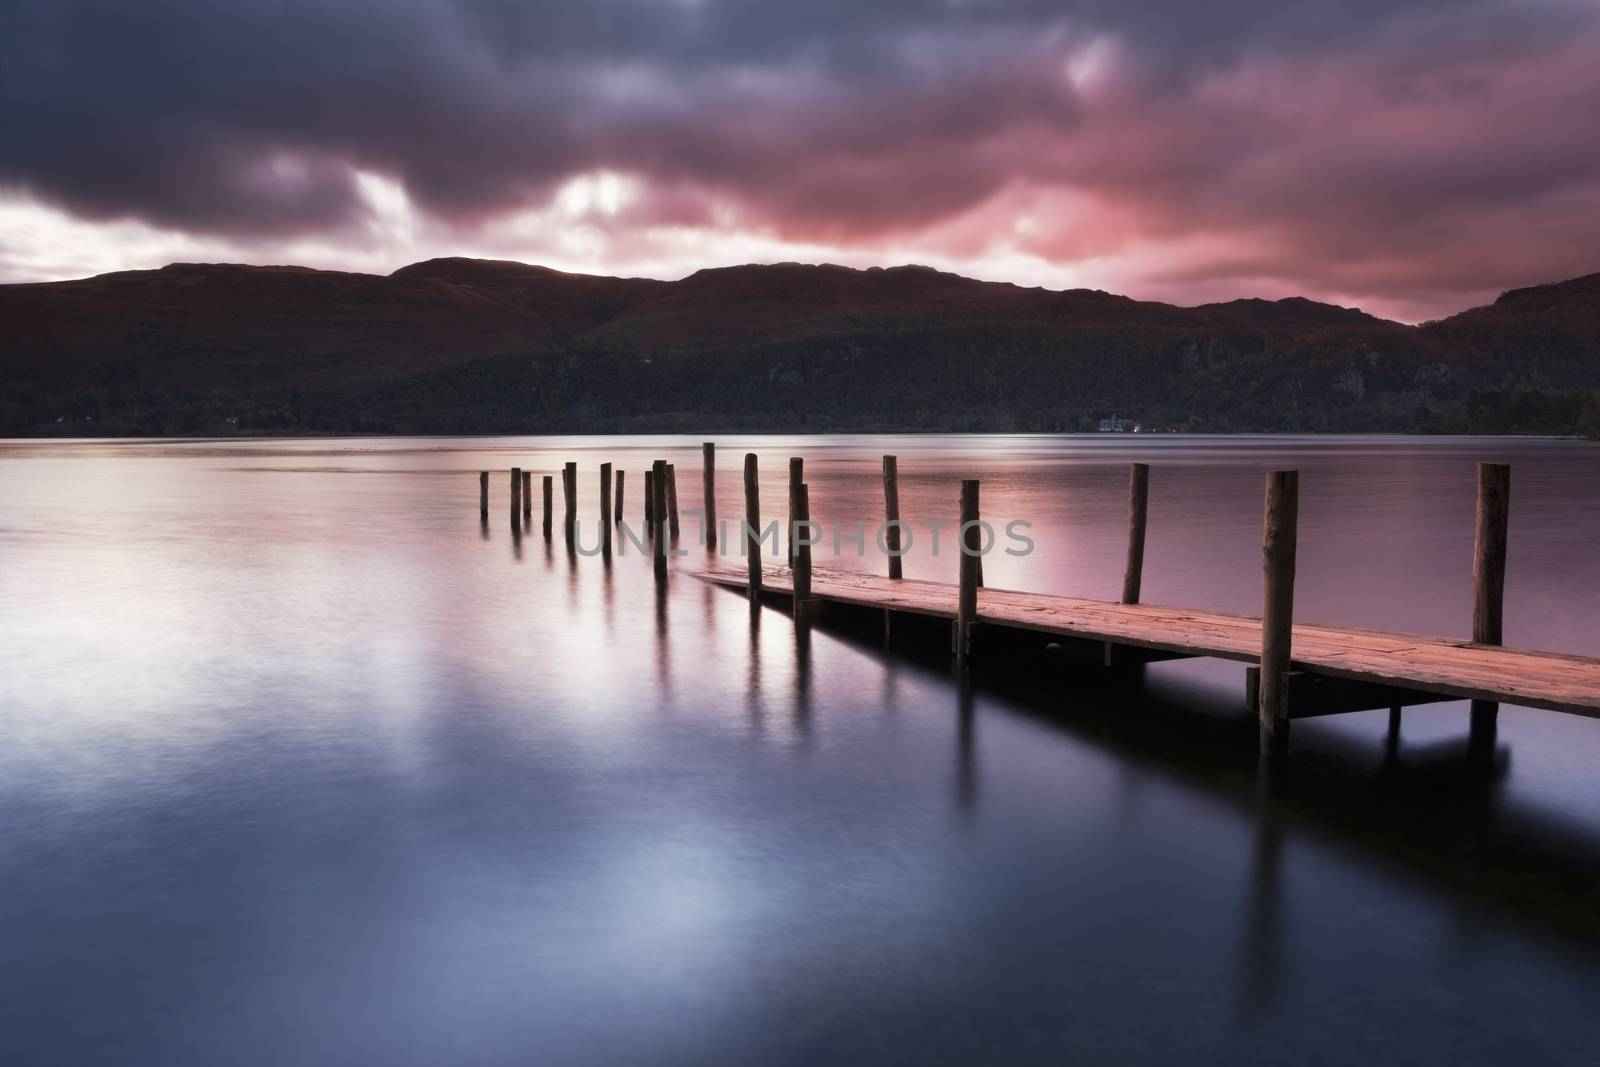 A view across Derwent water lake at dawn, with Jetty in foreground.
Lake District
Cumbria.
England




England